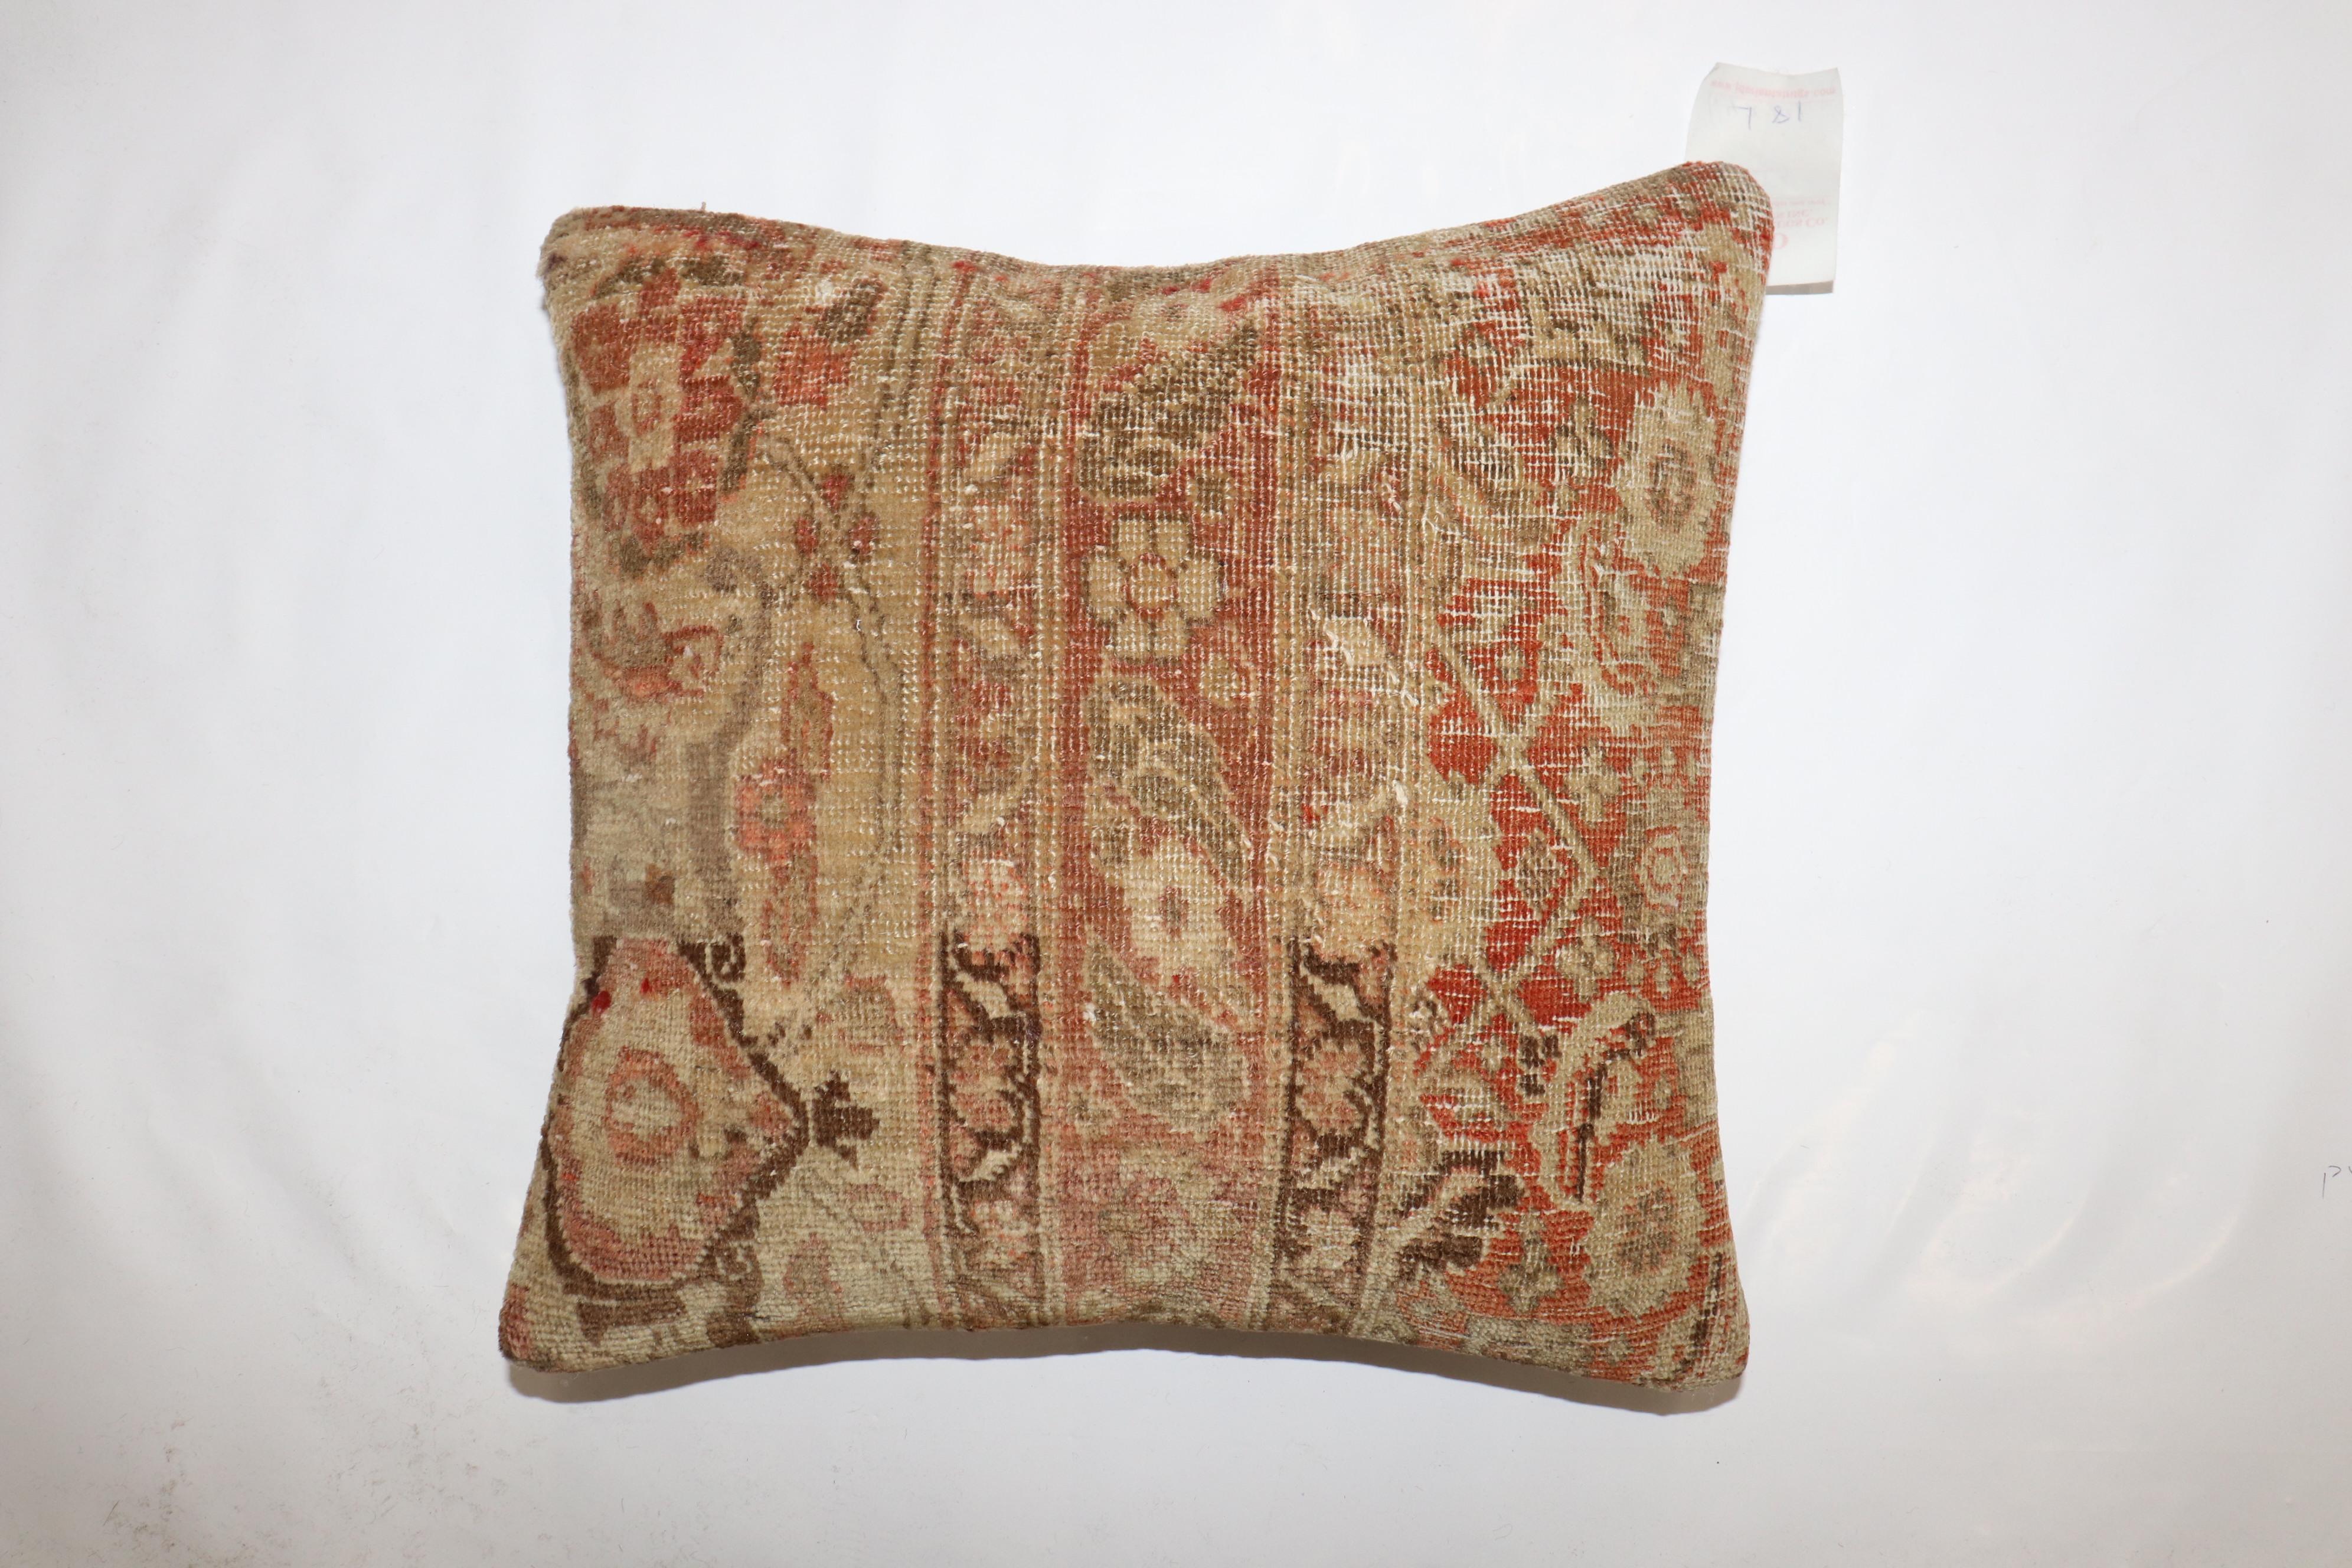 Pillow made from an early 20th-century Persian Tabriz rug.

Measures: 16'' x 16